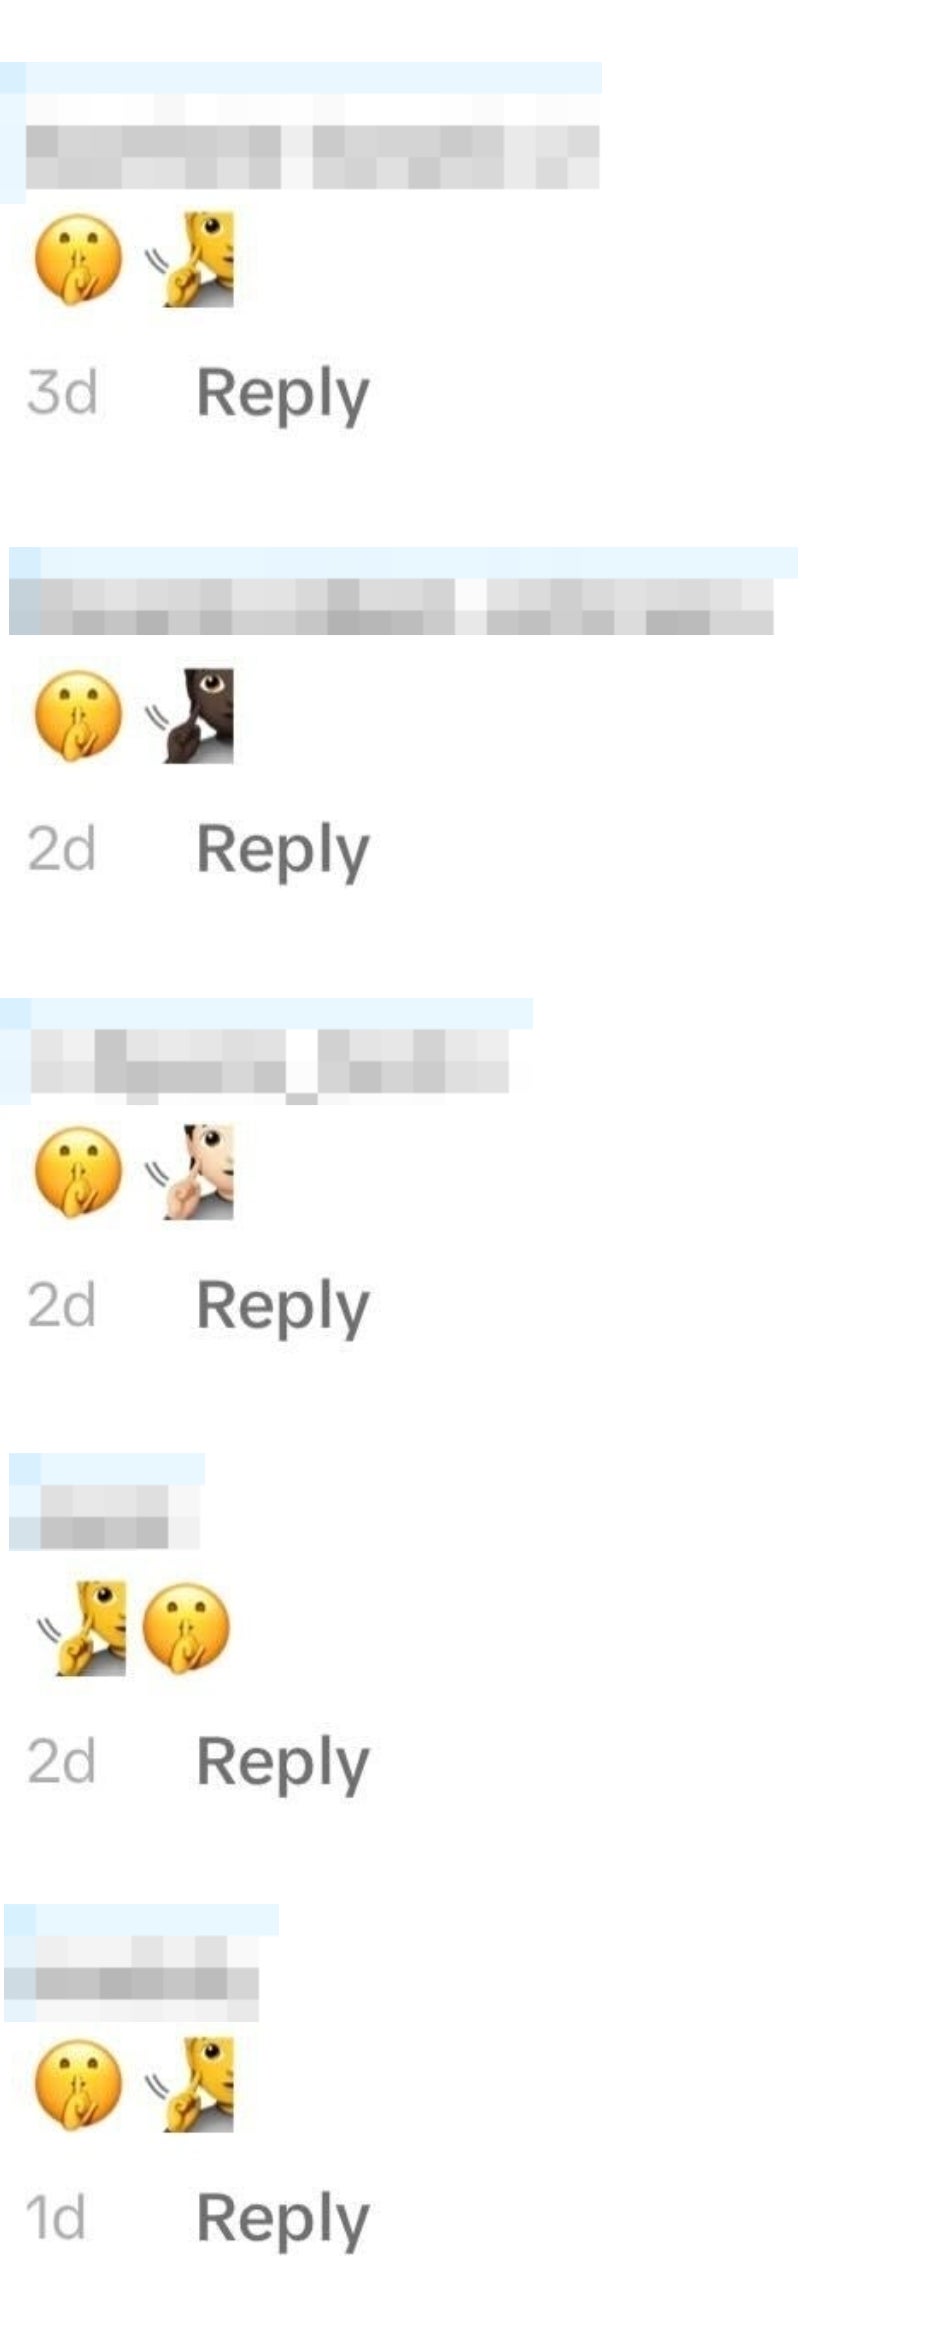 Emoji reactions to a post by multiple users, showcasing the shushing emoji followed by the emoji indicating that someone is deaf